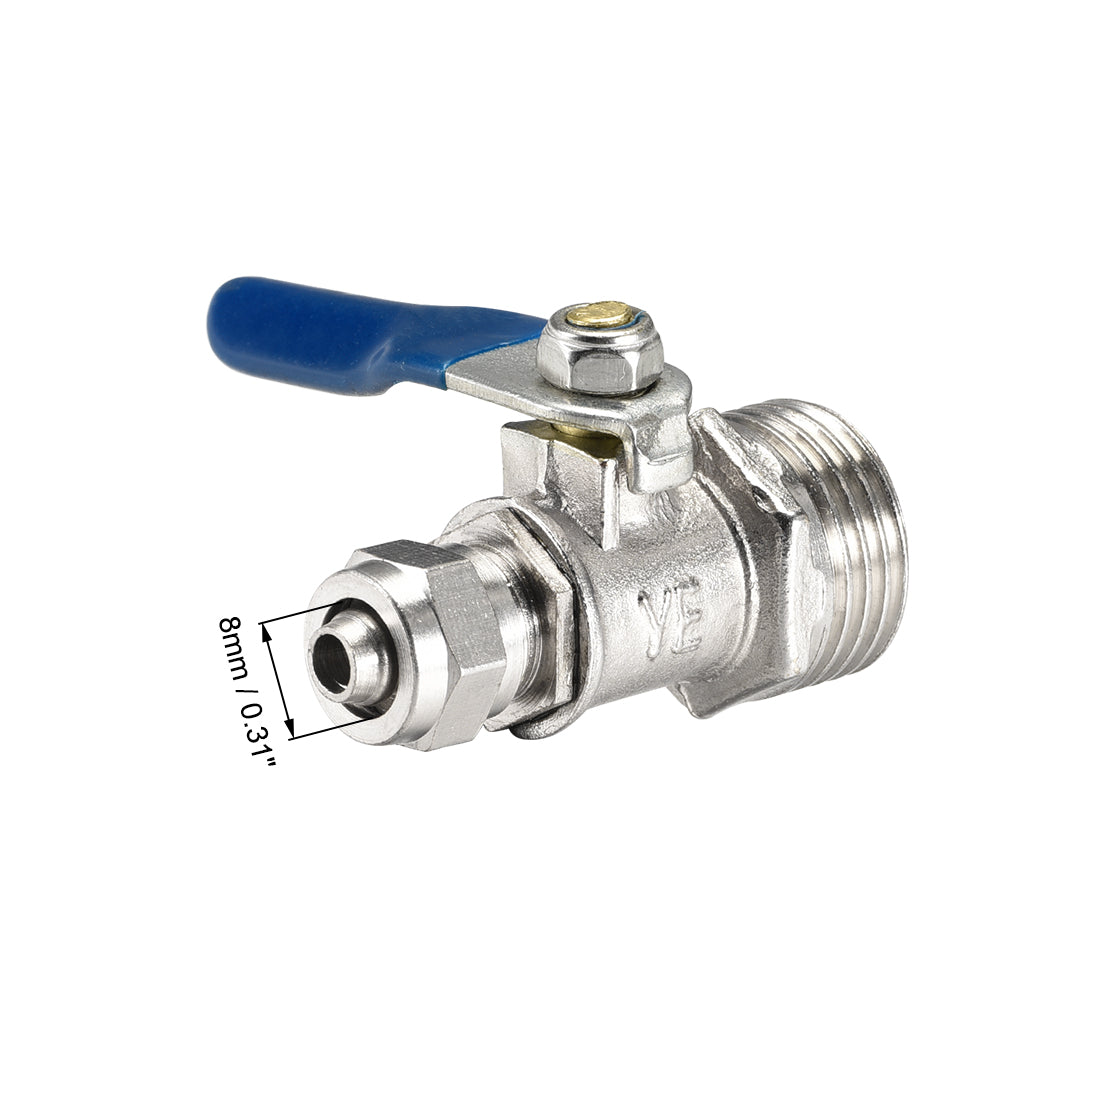 Uxcell Uxcell Ball Valve Water Switch, G1/2 Male Thread, 10mm OD Tube, Nickel Plated Brass, for Water Purifiers